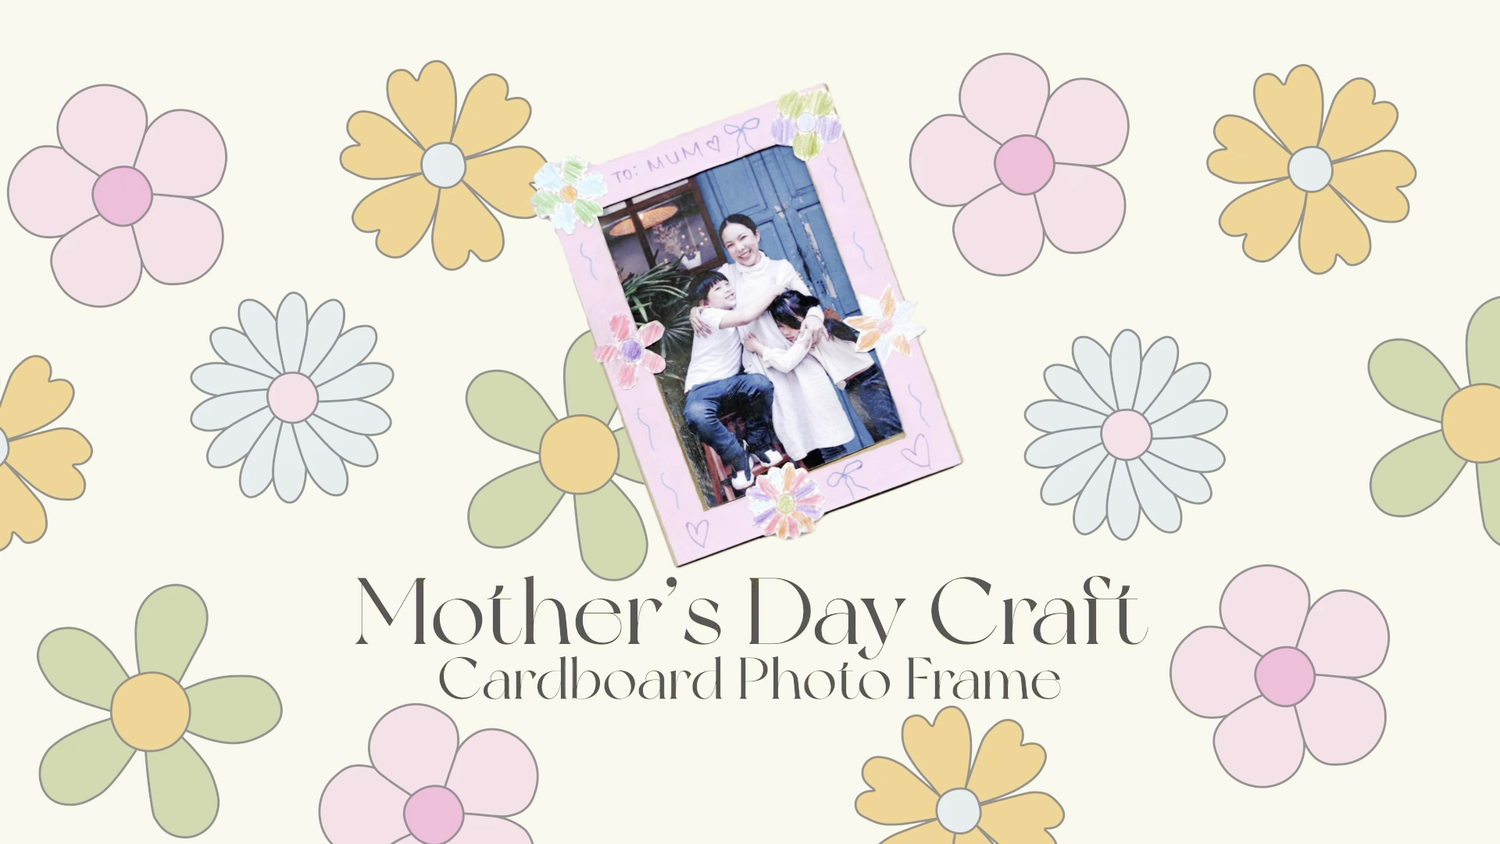 Mothers' Day Craft